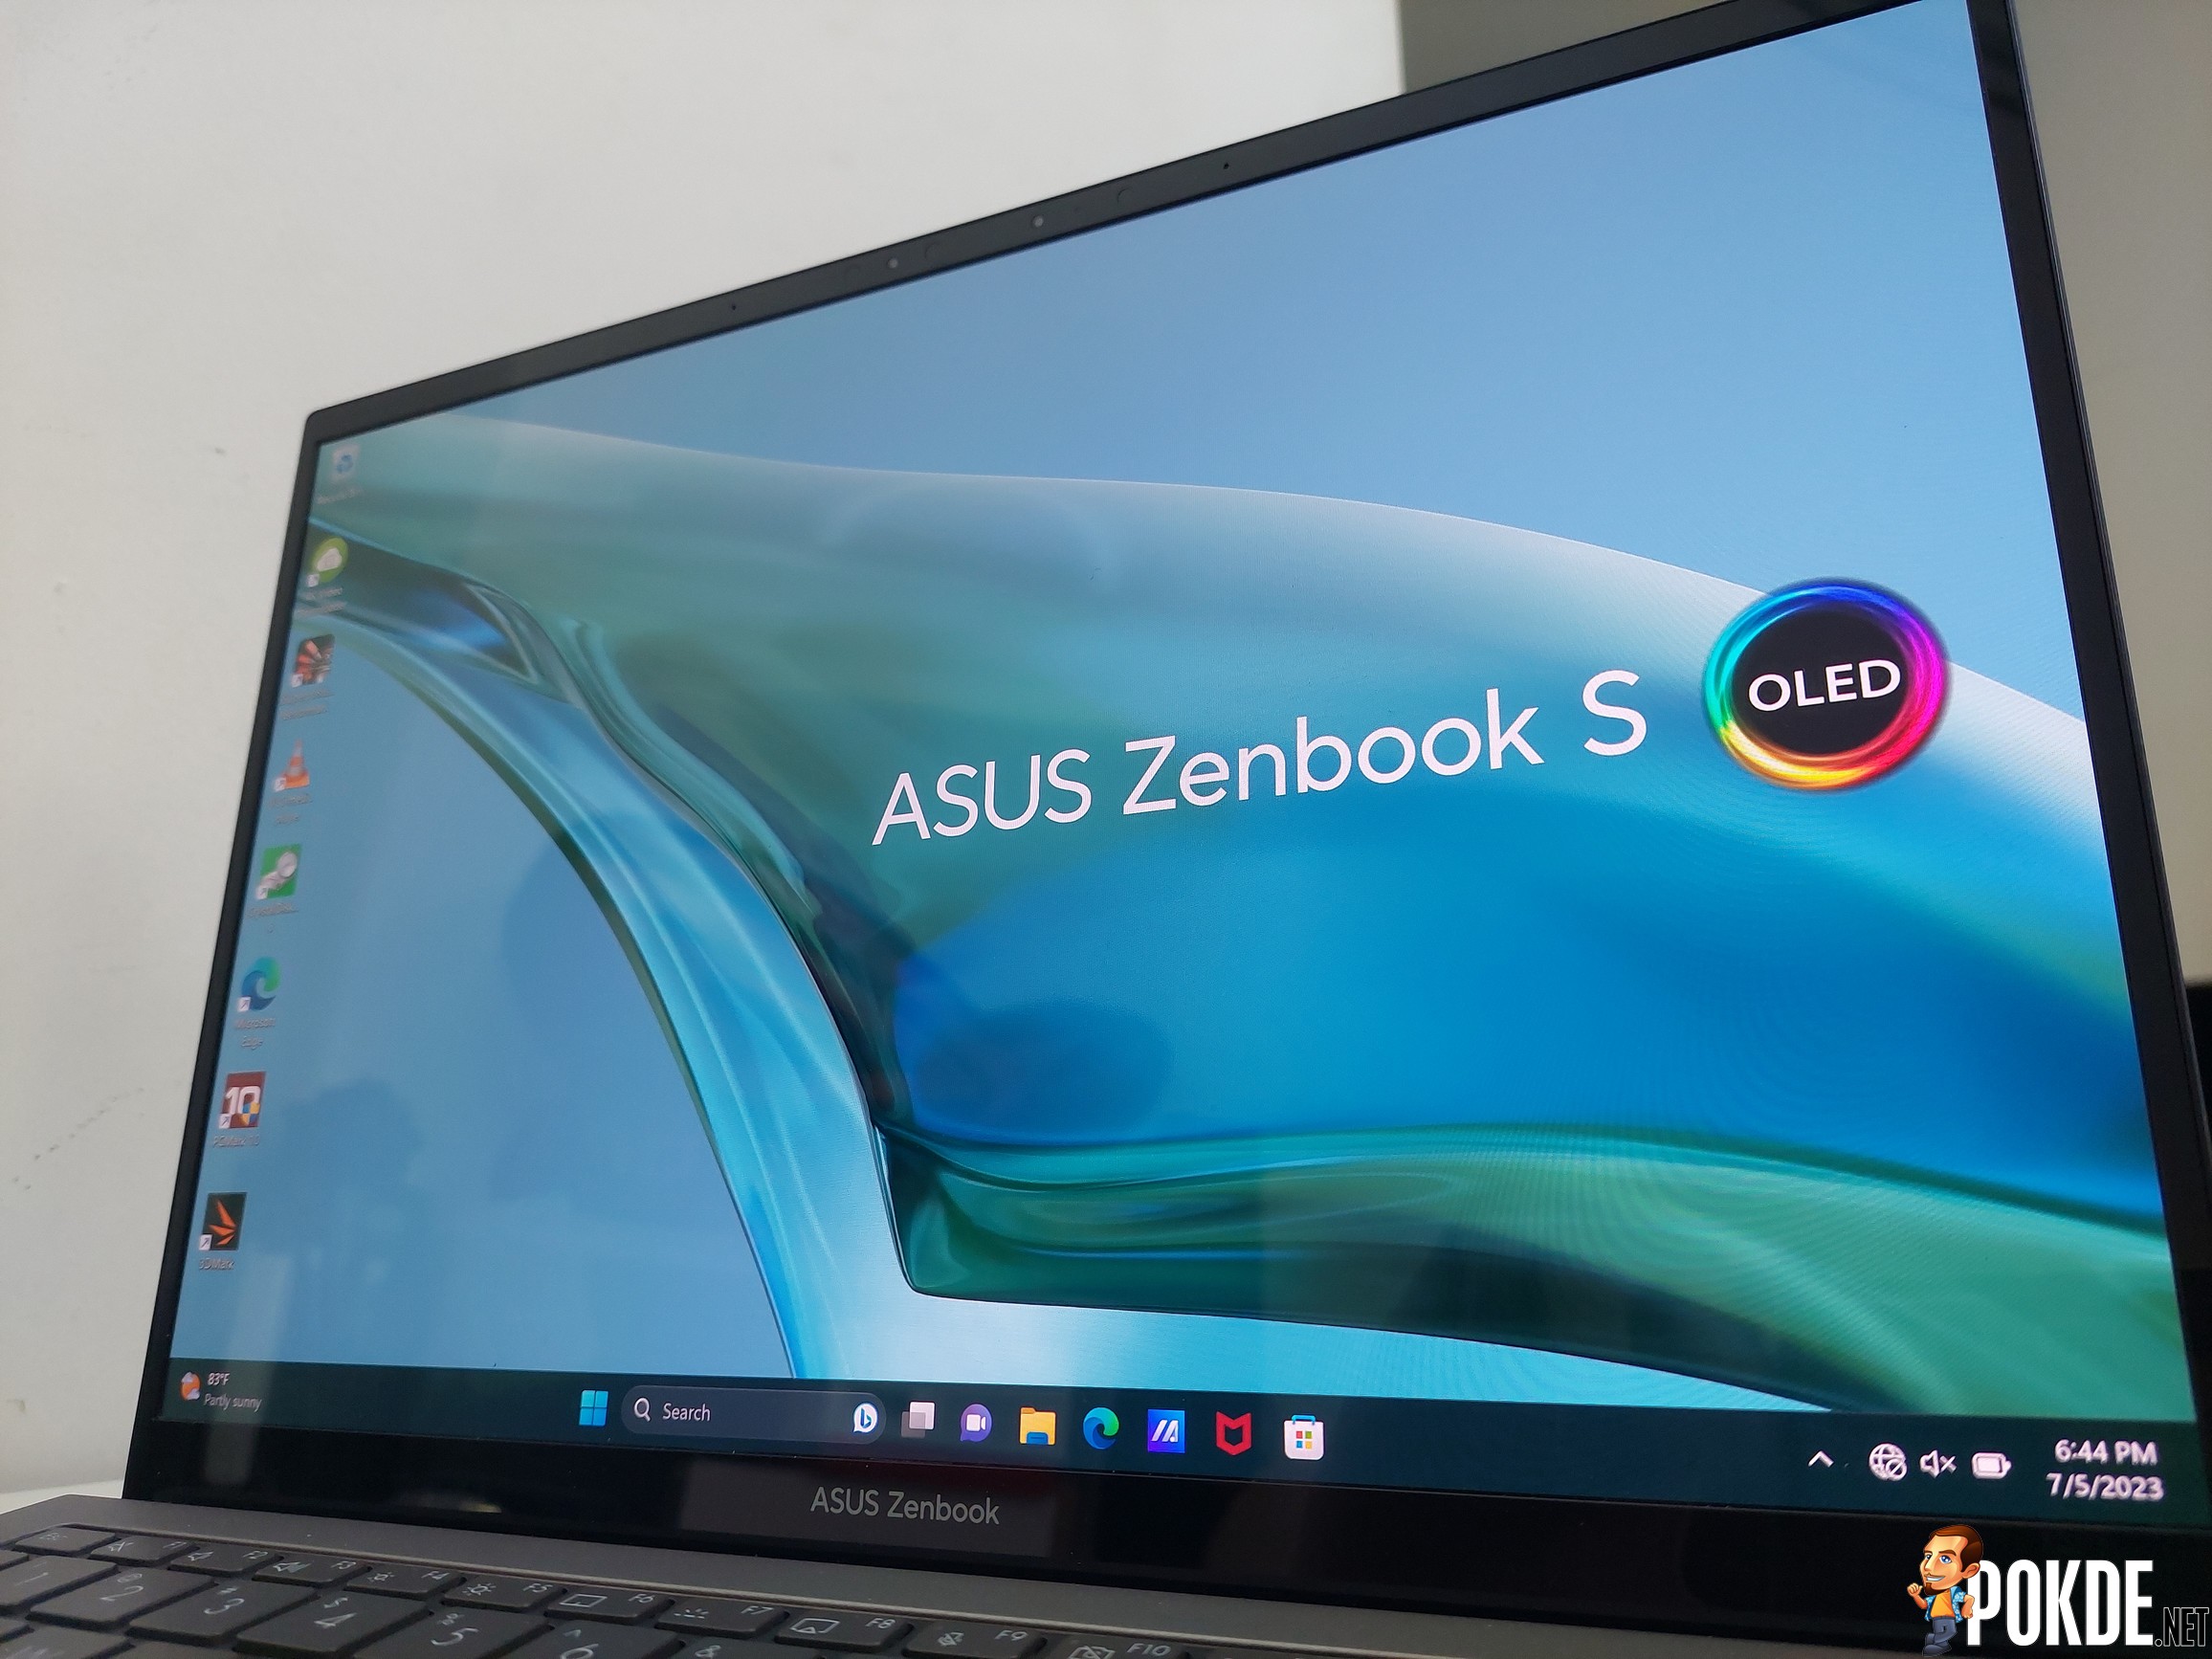 Asus Zenbook 13 OLED review: An excellent value